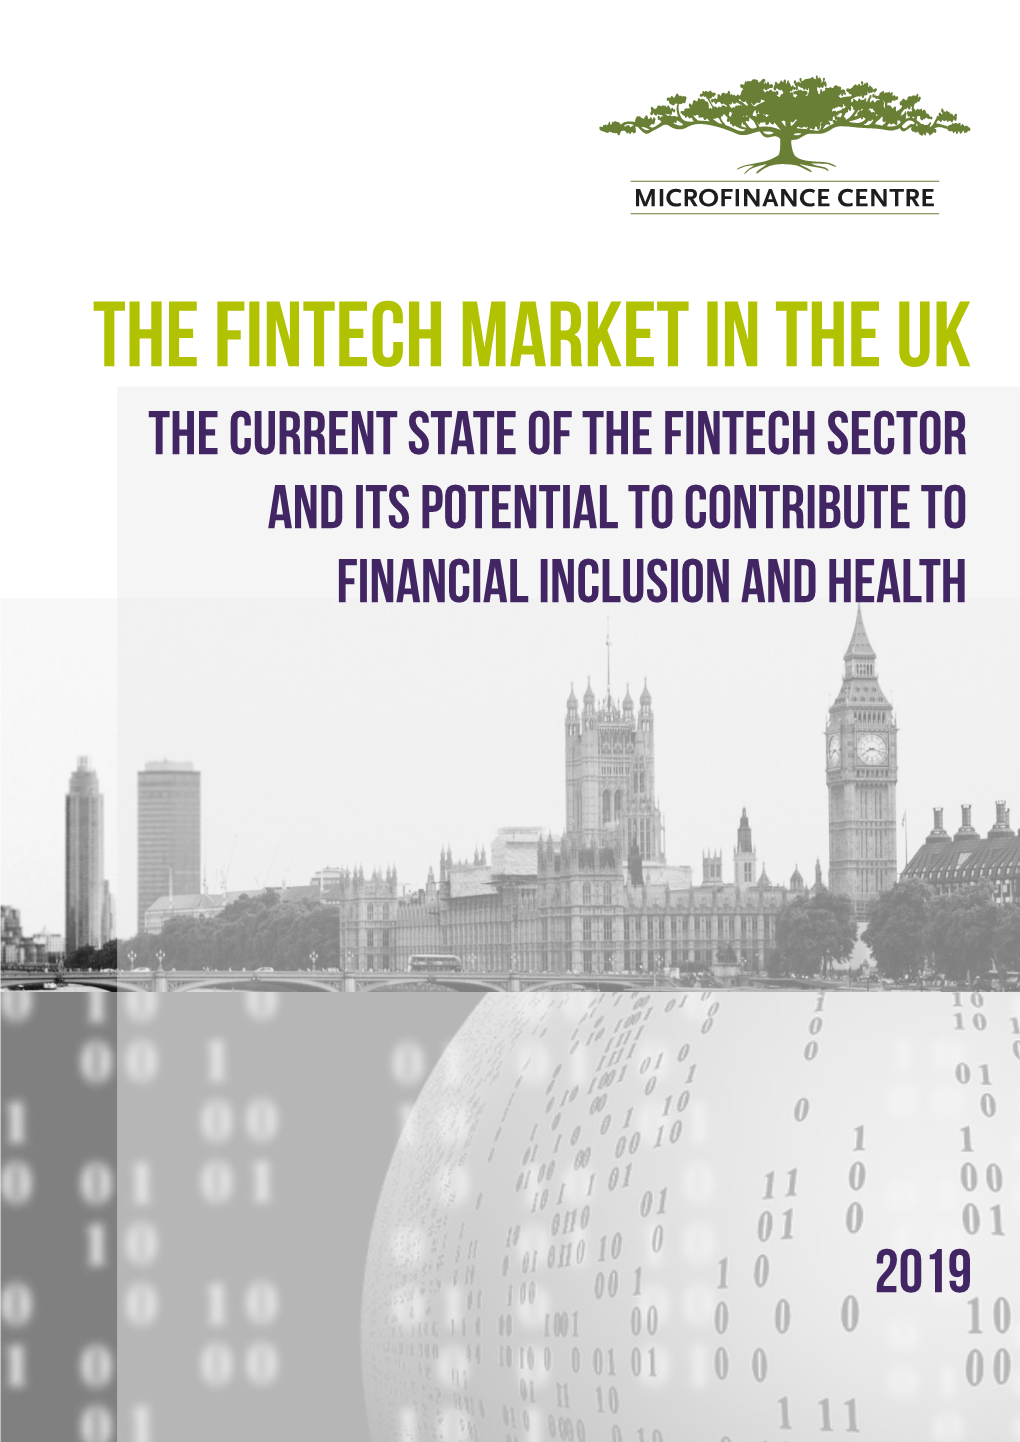 The Fintech Market in the UK the Current State of the Fintech Sector and Its Potential to Contribute to Financial Inclusion and Health